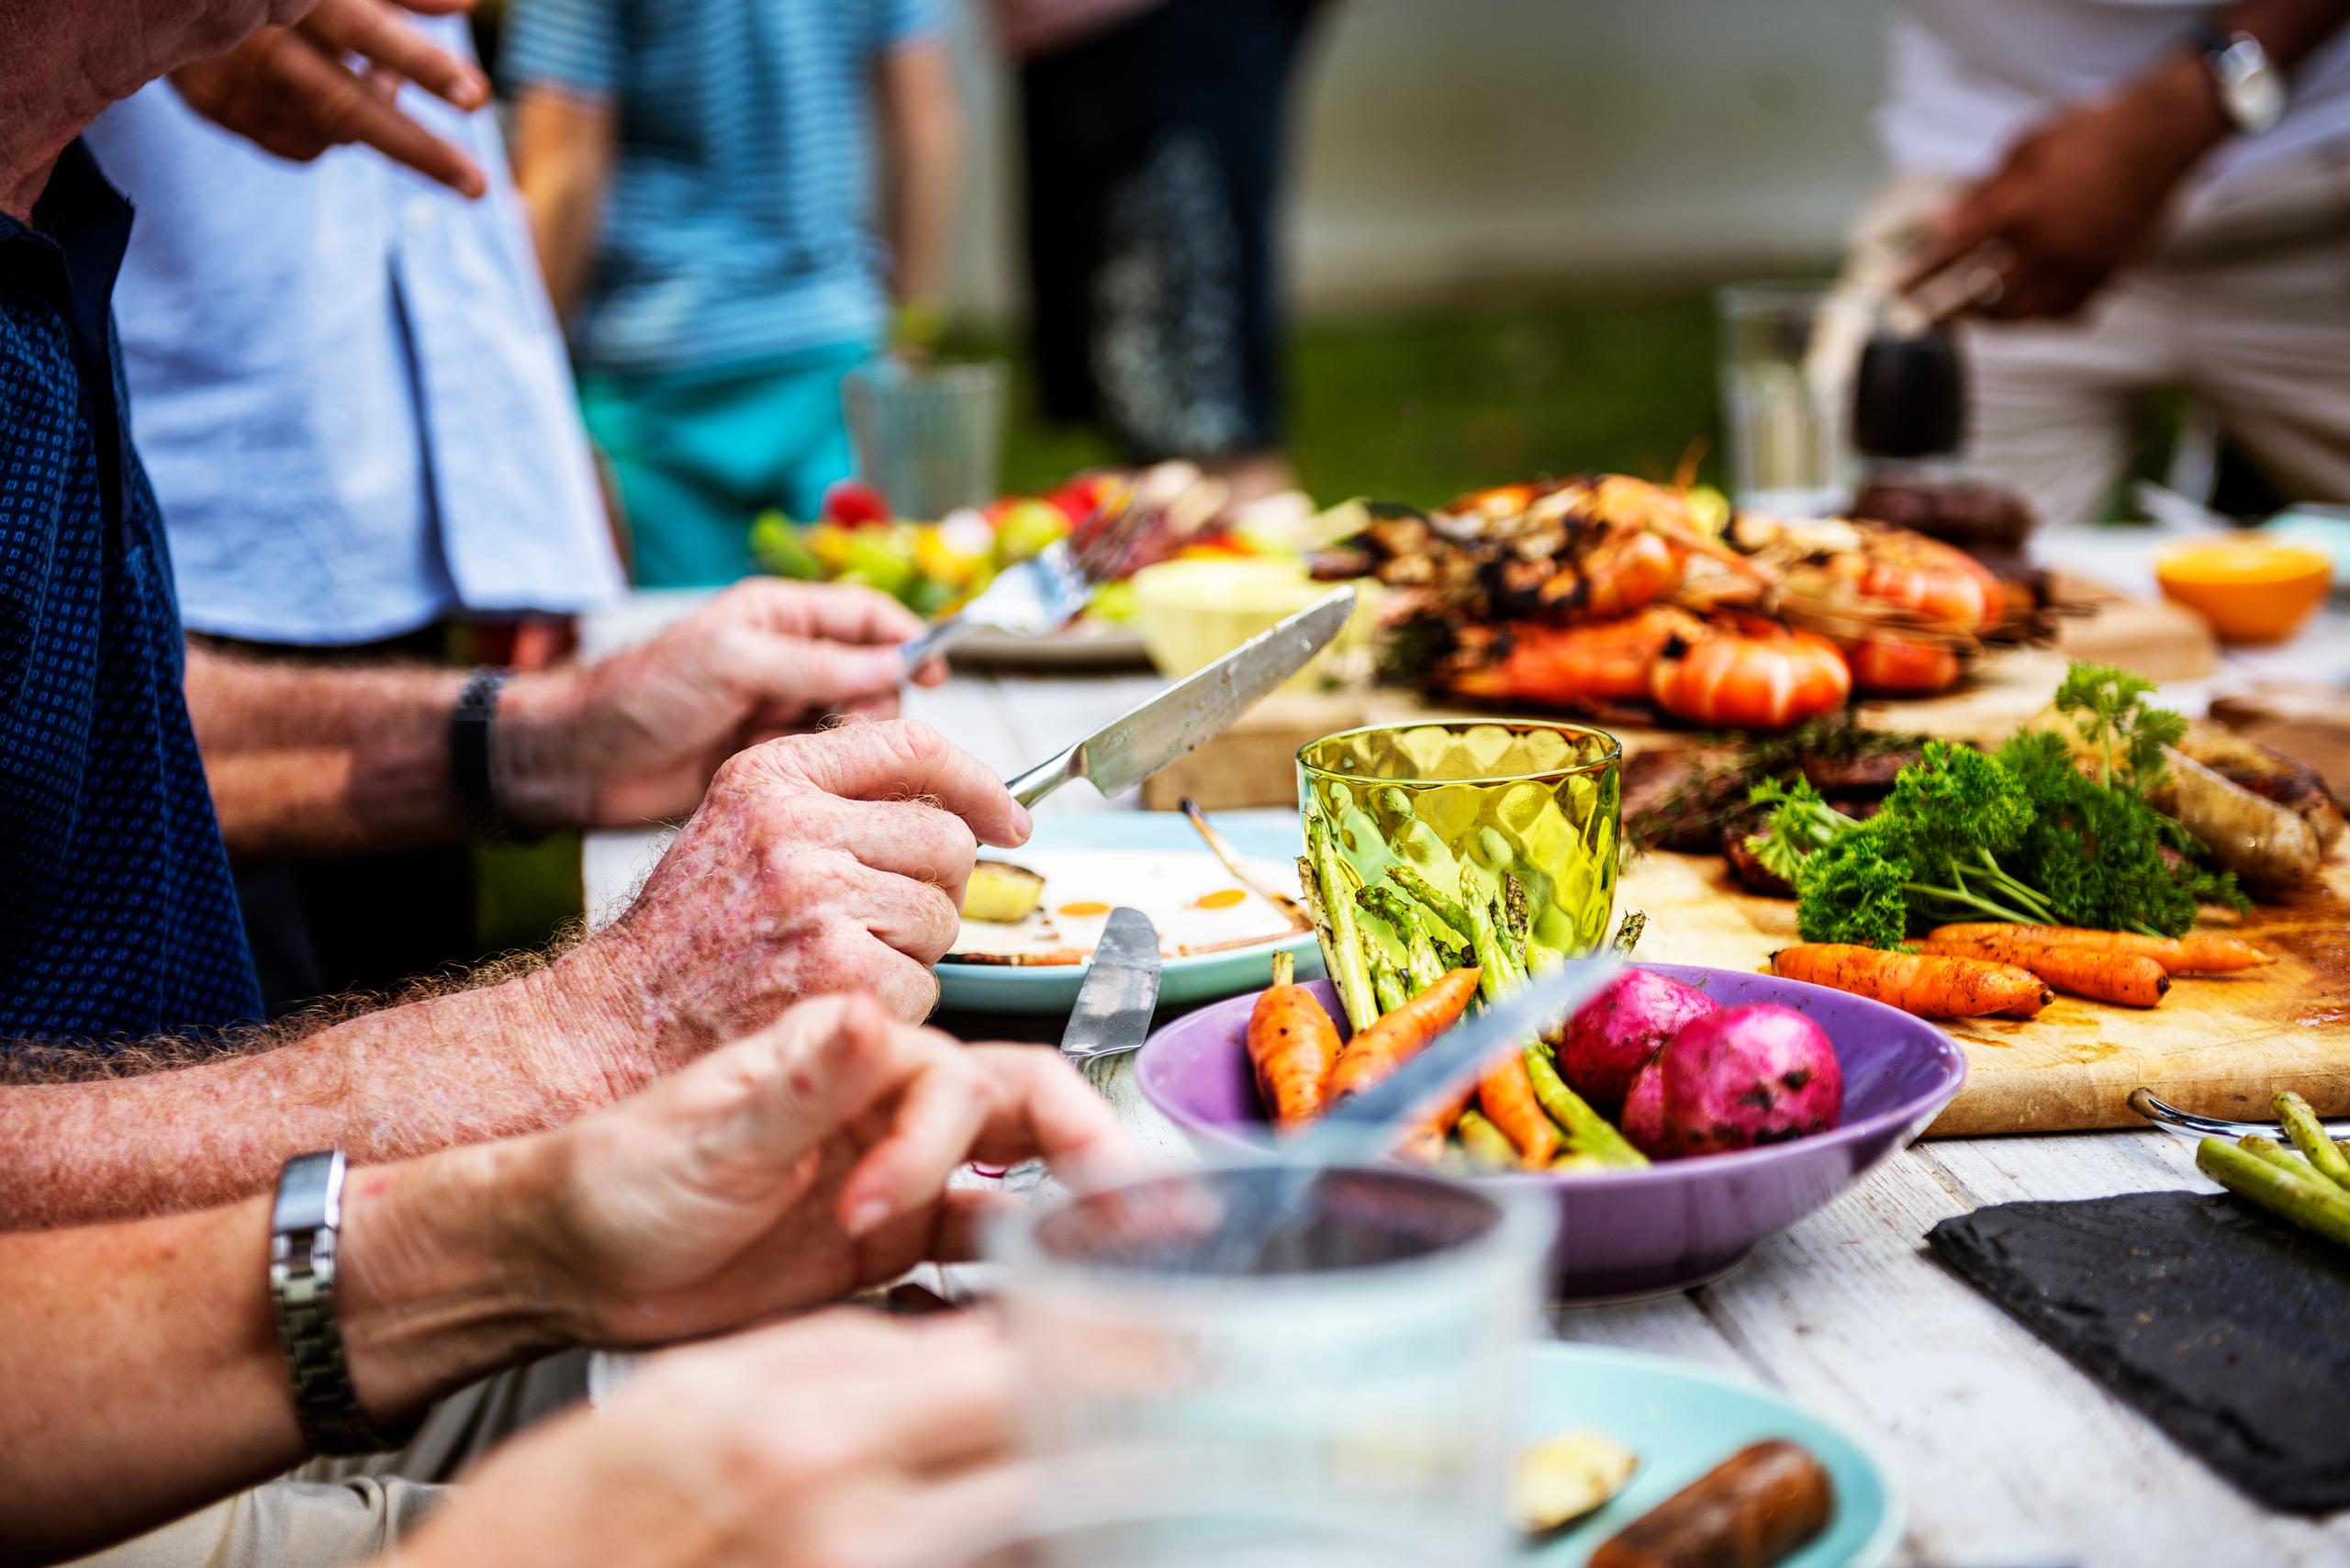 <a href="https://www.freepik.com/free-photo/closeup-diverse-people-enjoying-barbecue-party-together_2861347.htm#query=eating&position=35&from_view=search&track=sph">Image by rawpixel.com</a> on Freepik